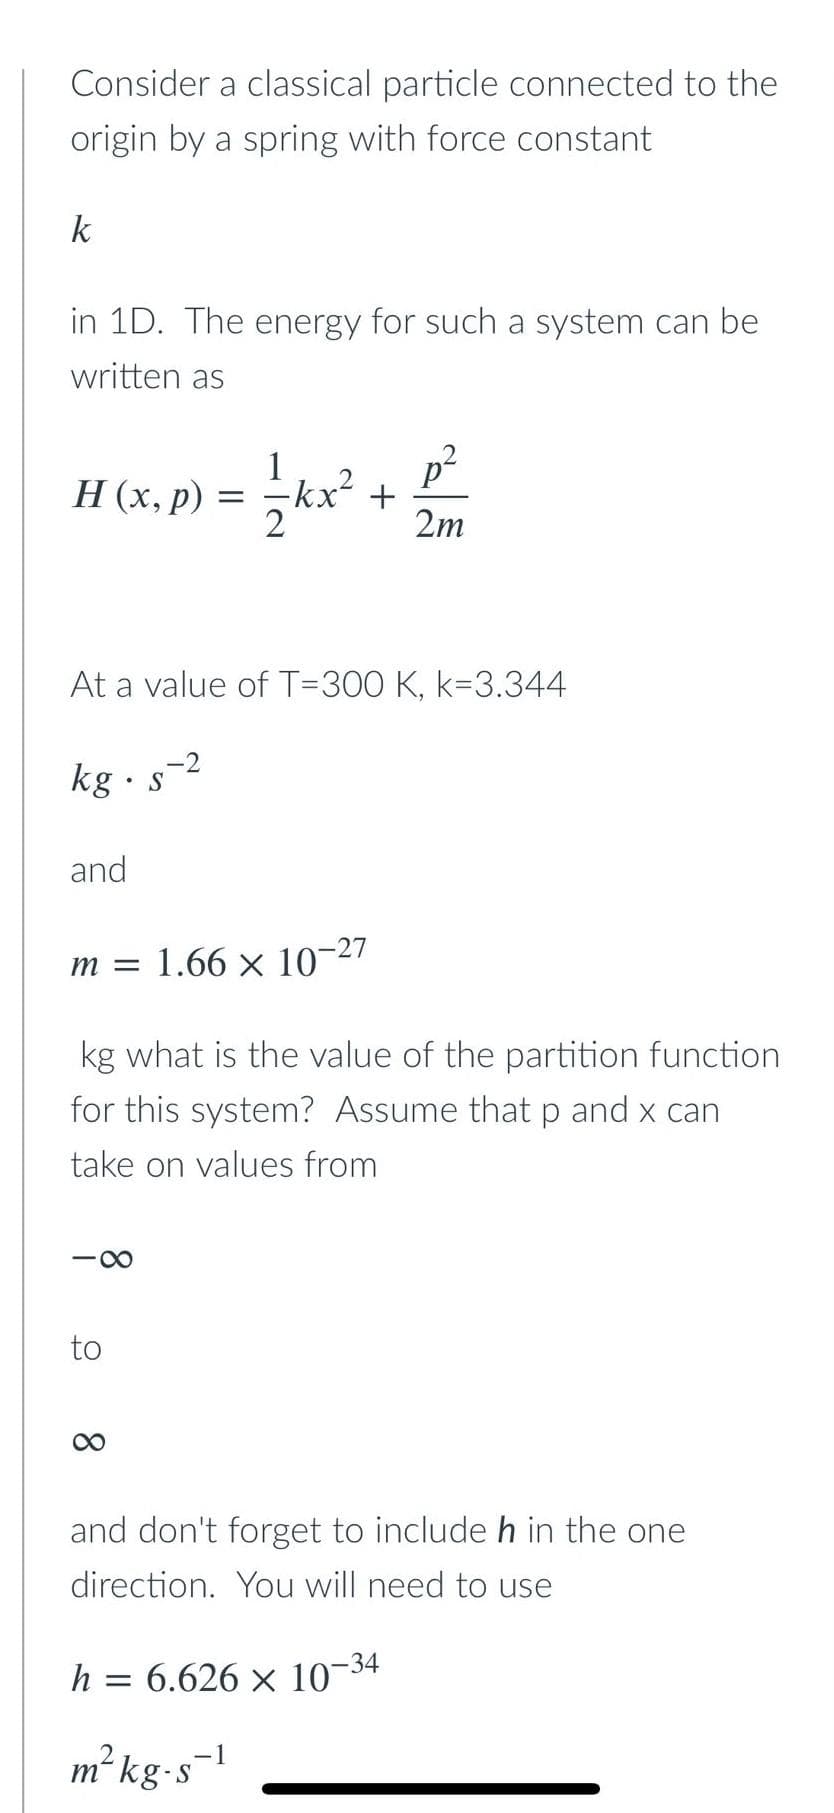 Consider a classical particle connected to the
origin by a spring with force constant
k
in 1D. The energy for such a system can be
written as
H (x, p)
and
-∞
At a value of T-300 K, k-3.344
kg. s-2
to
=
8
m = 1.66 × 10-27
kg what is the value of the partition function
for this system? Assume that p and x can
take on values from
2²kx²
h =
+
p²
2m
and don't forget to include h in the one
direction. You will need to use
m² kg-s-1
6.626 × 10-34